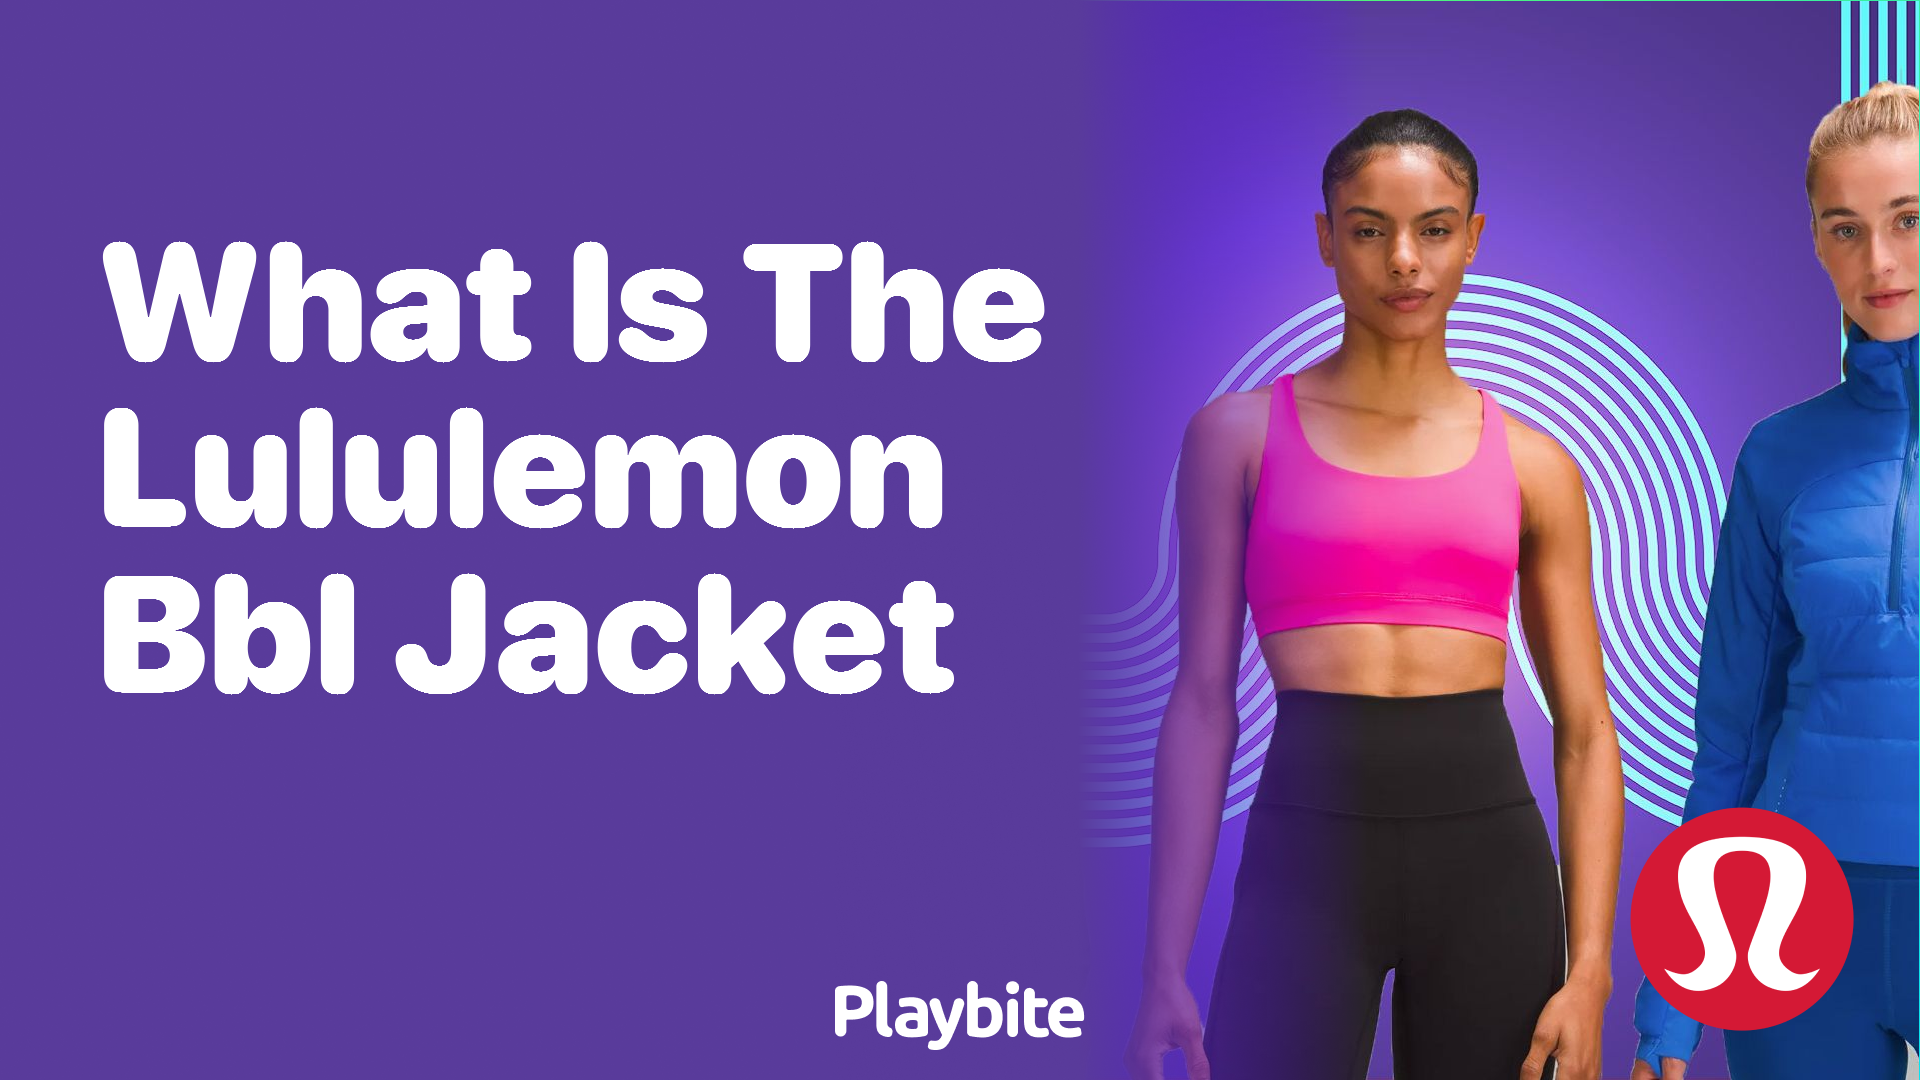 What Is the Lululemon BBL Jacket? Discover Its Unique Features